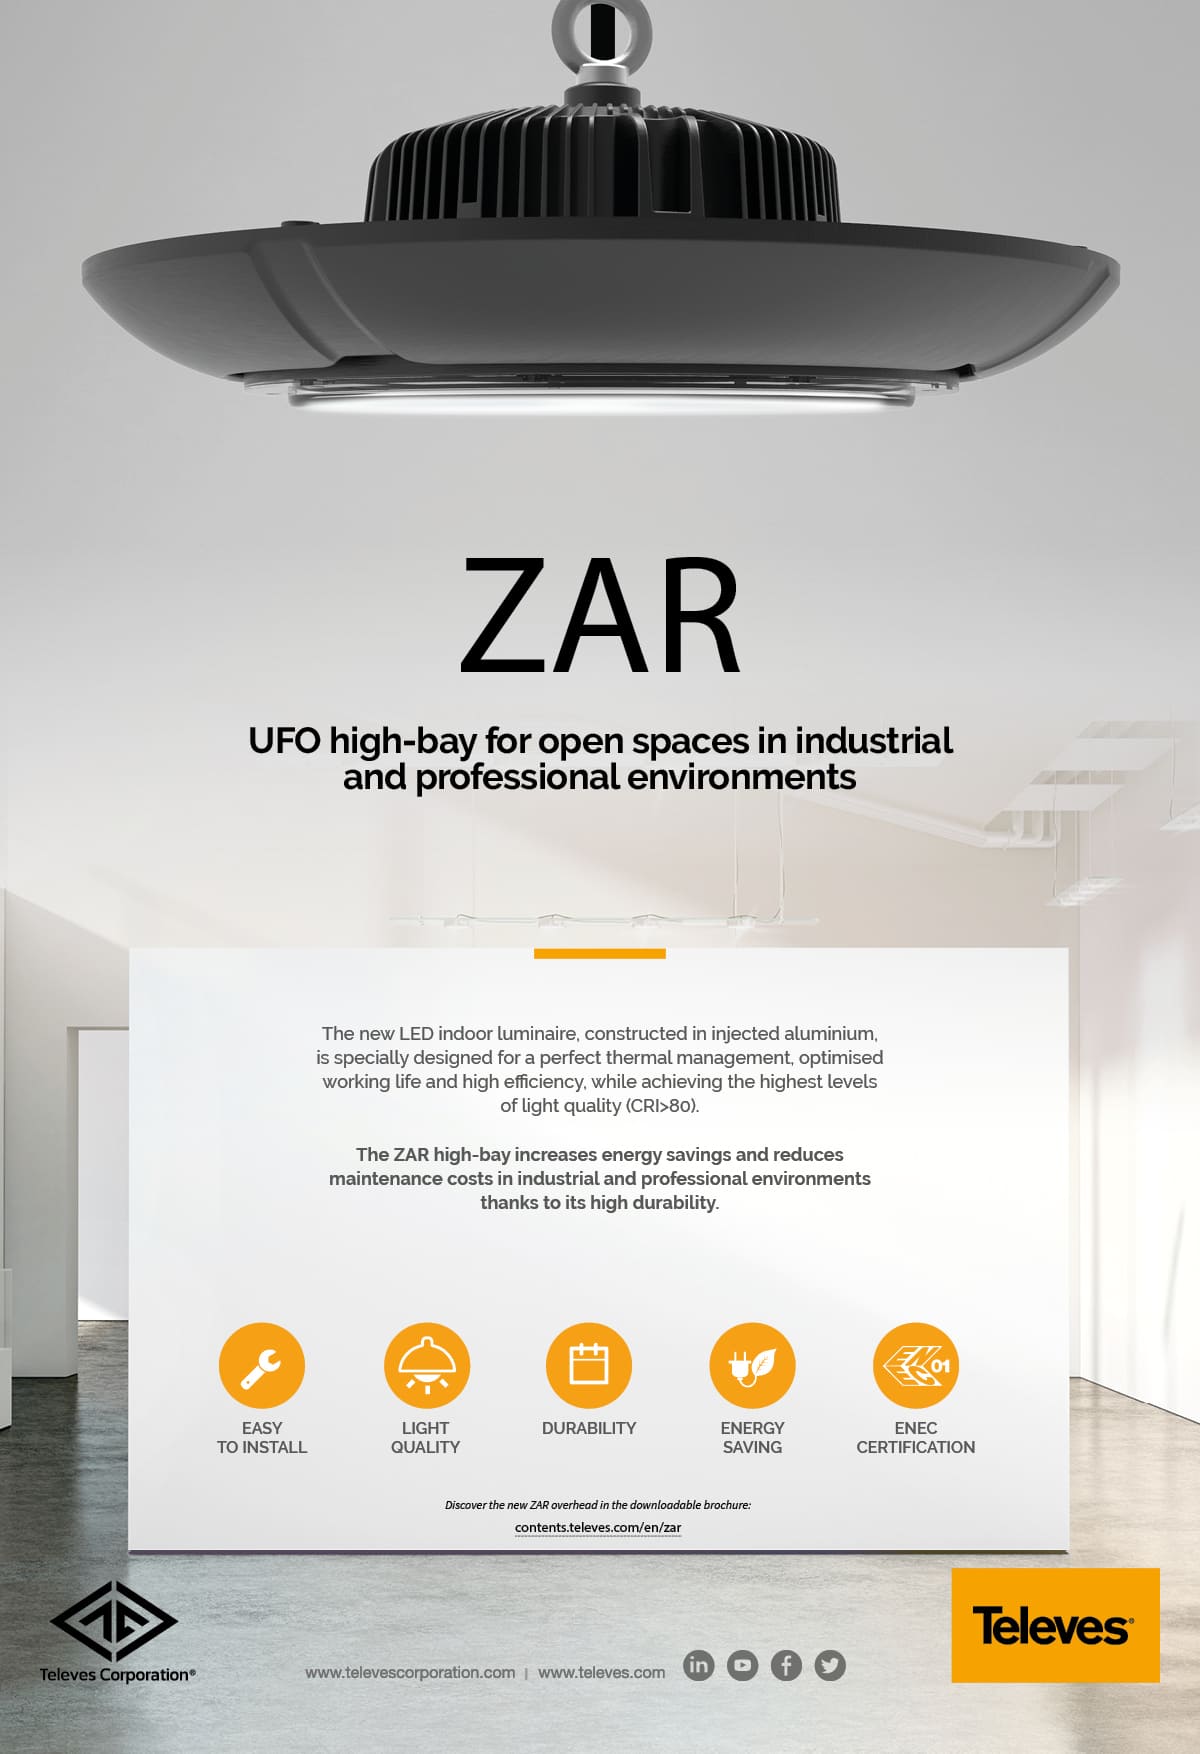 ZAR. UFO high-bay for open spaces in industrial and professional environments